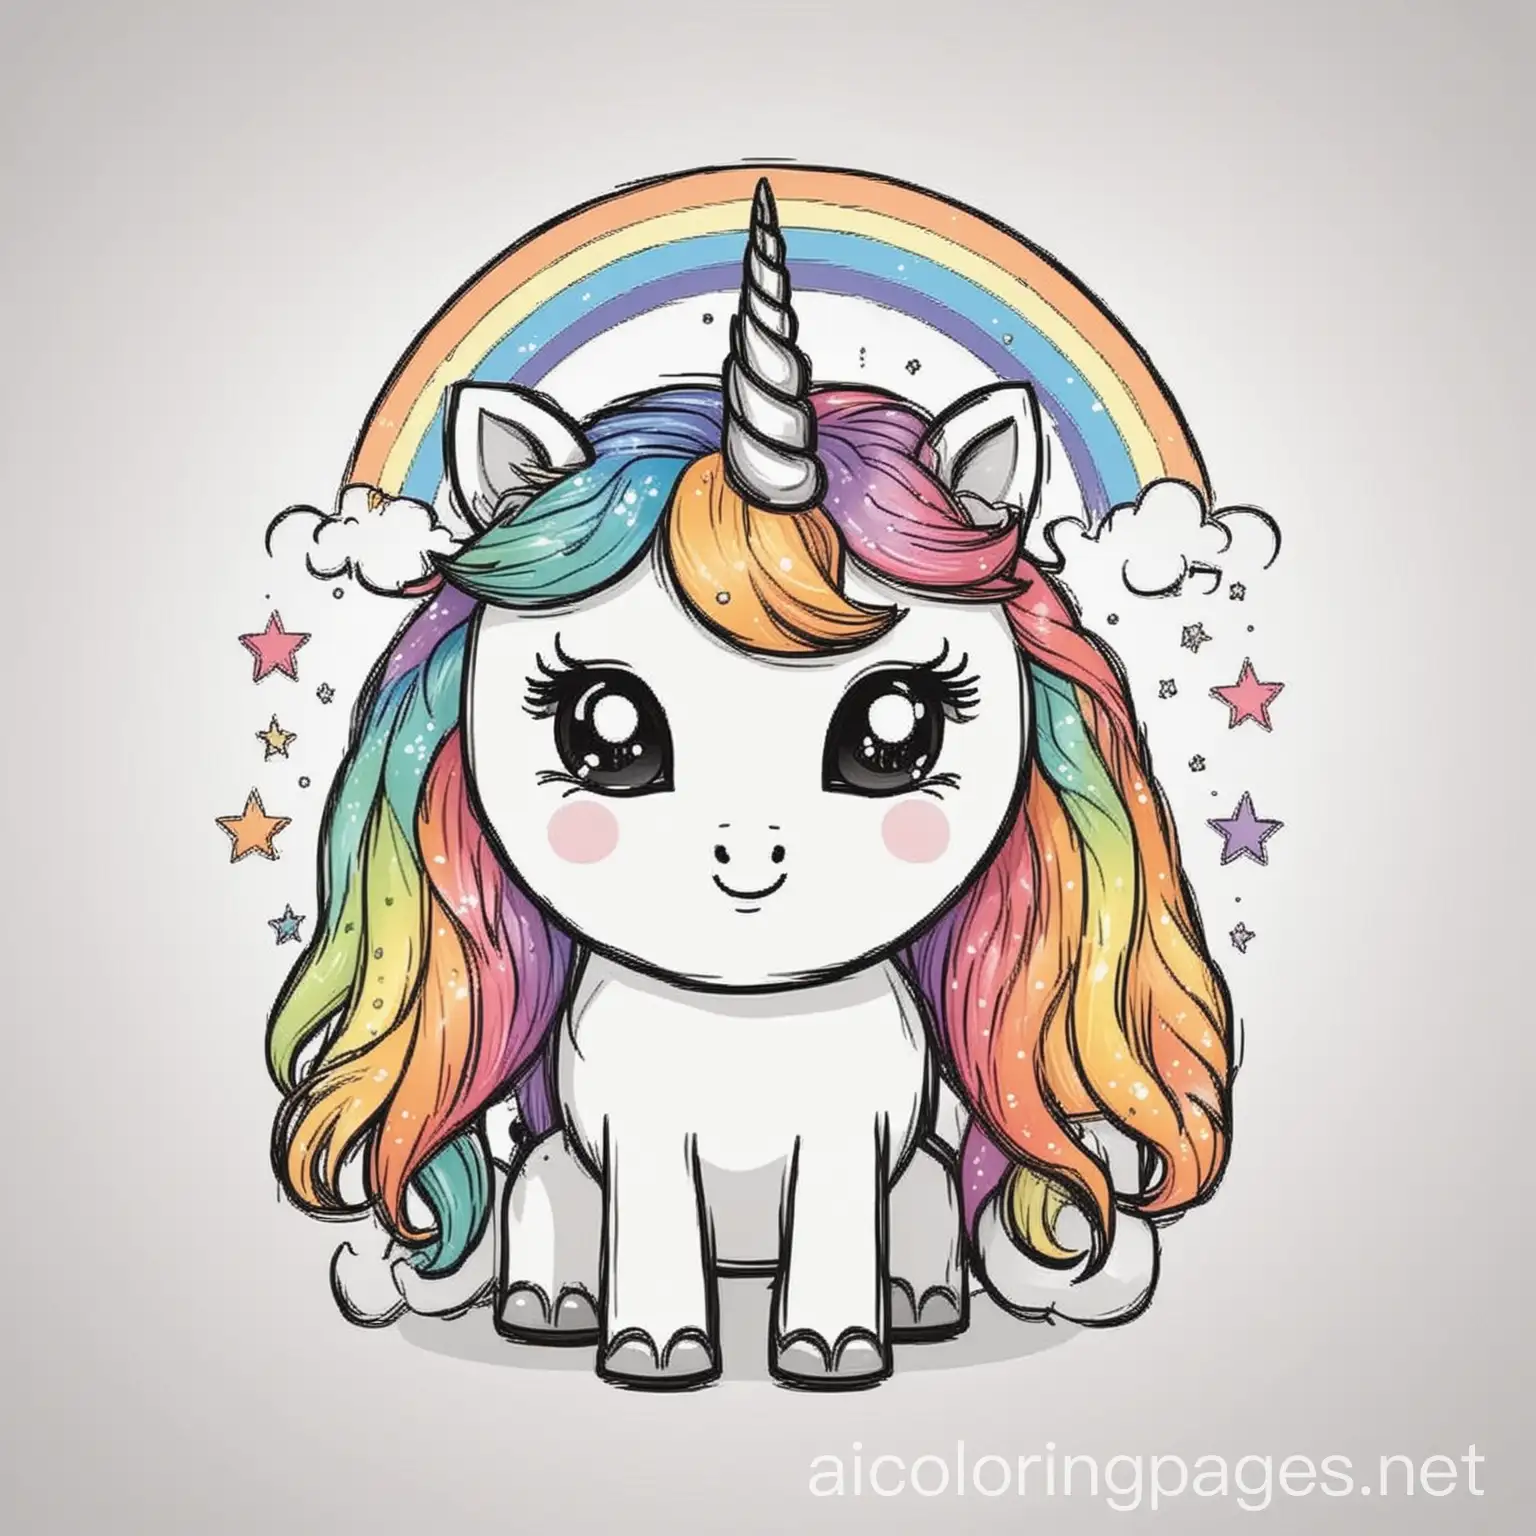 Adorable-Unicorn-Coloring-Page-with-Rainbow-Mane-for-Kids